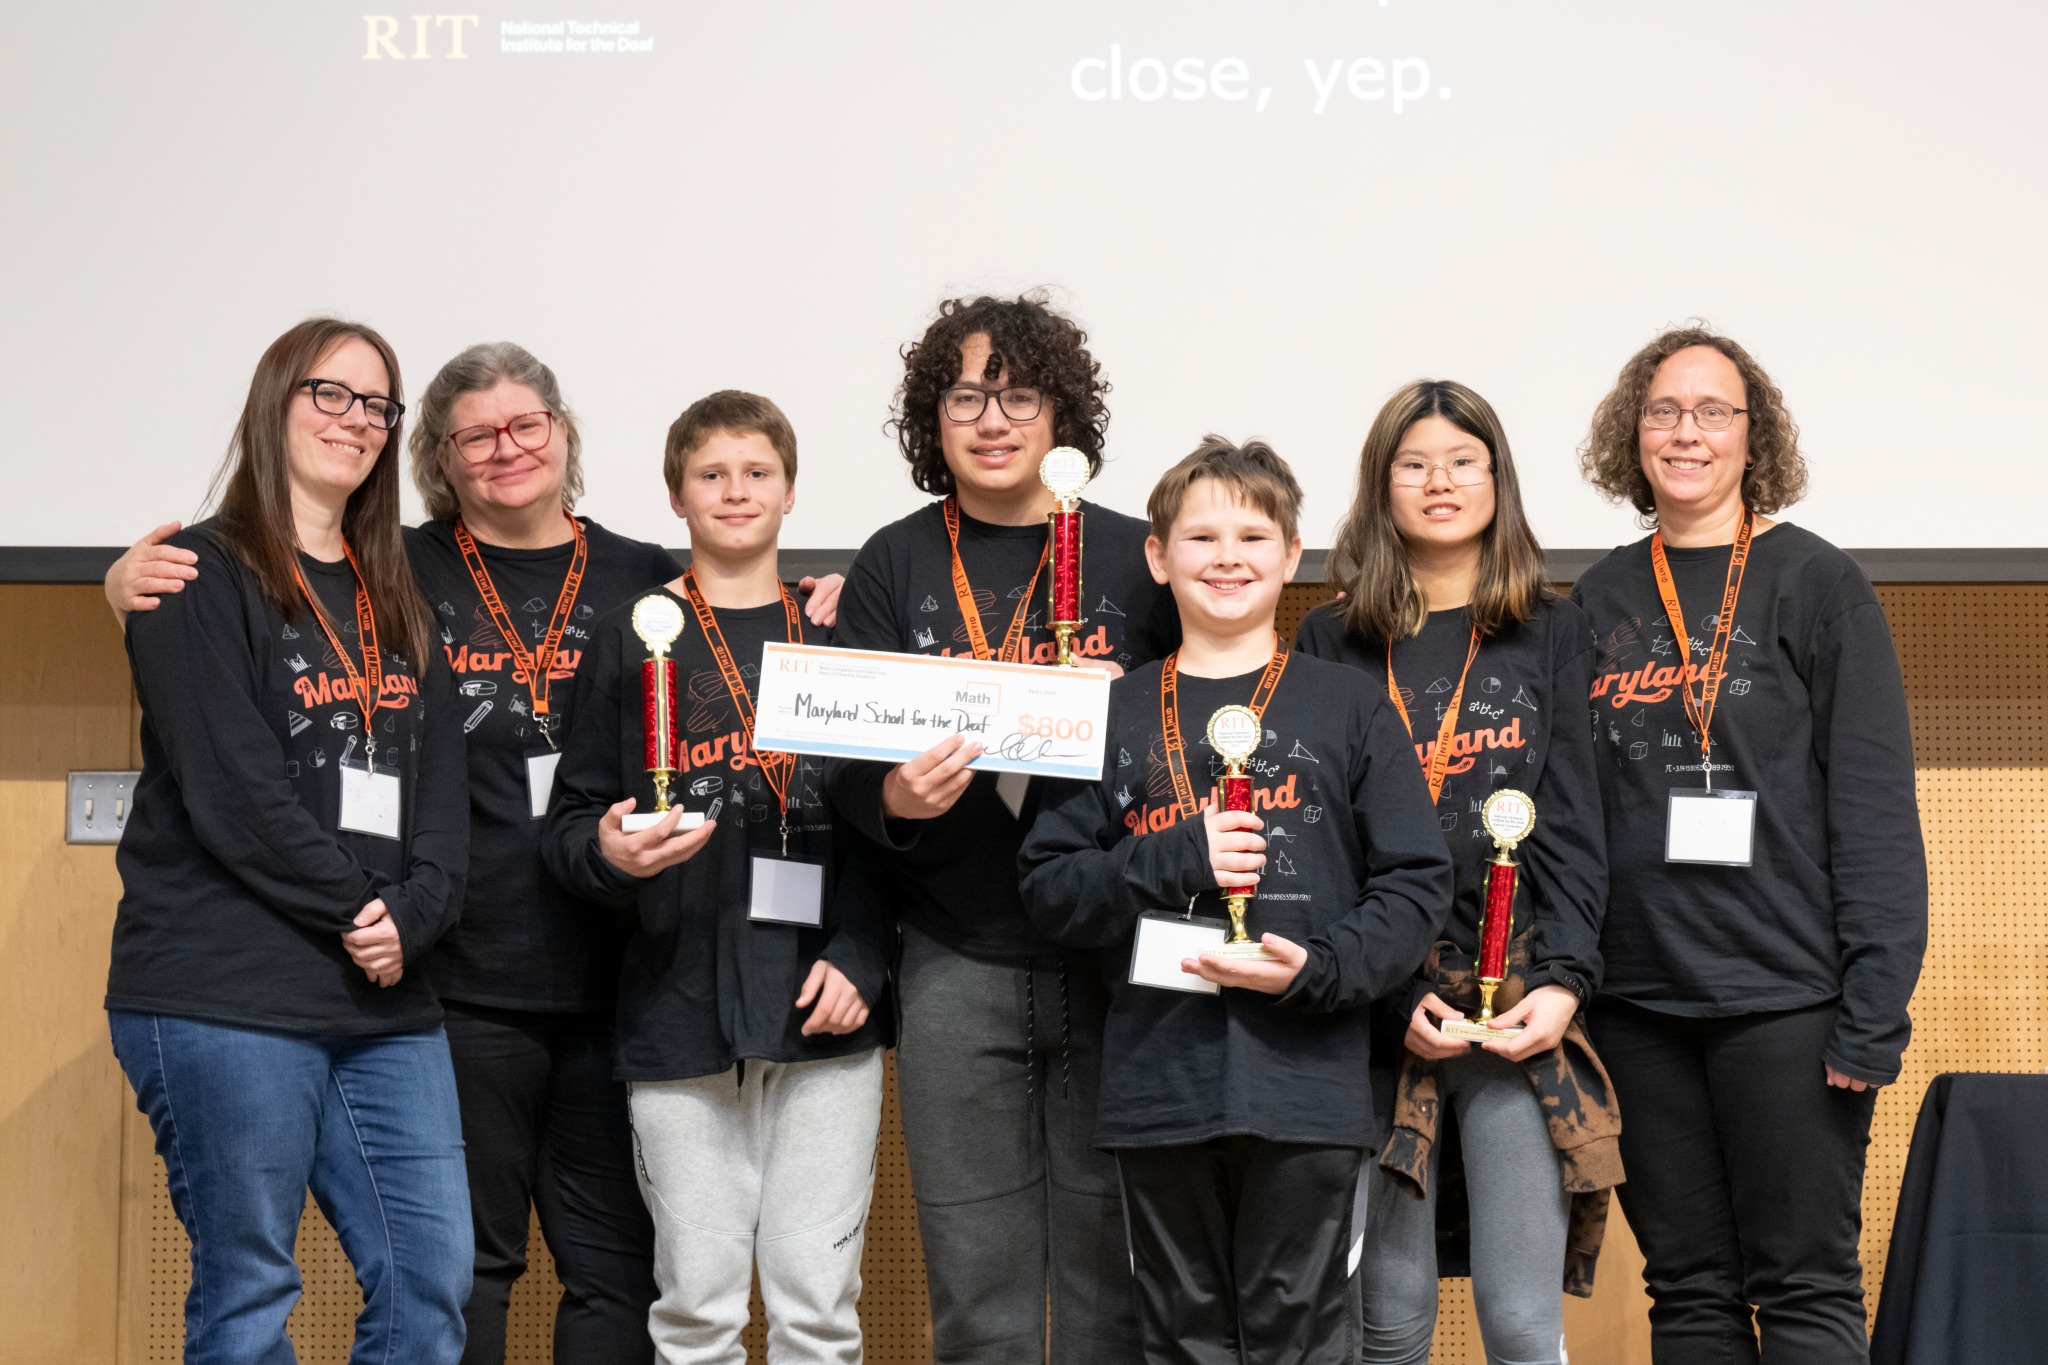 The image shows Maryland School for the Deaf contestants and their coaches in black and orange team shirts, standing in line, facing the camera and holding up trophies and a check for $800. Each person is wearing an orange name tag. 